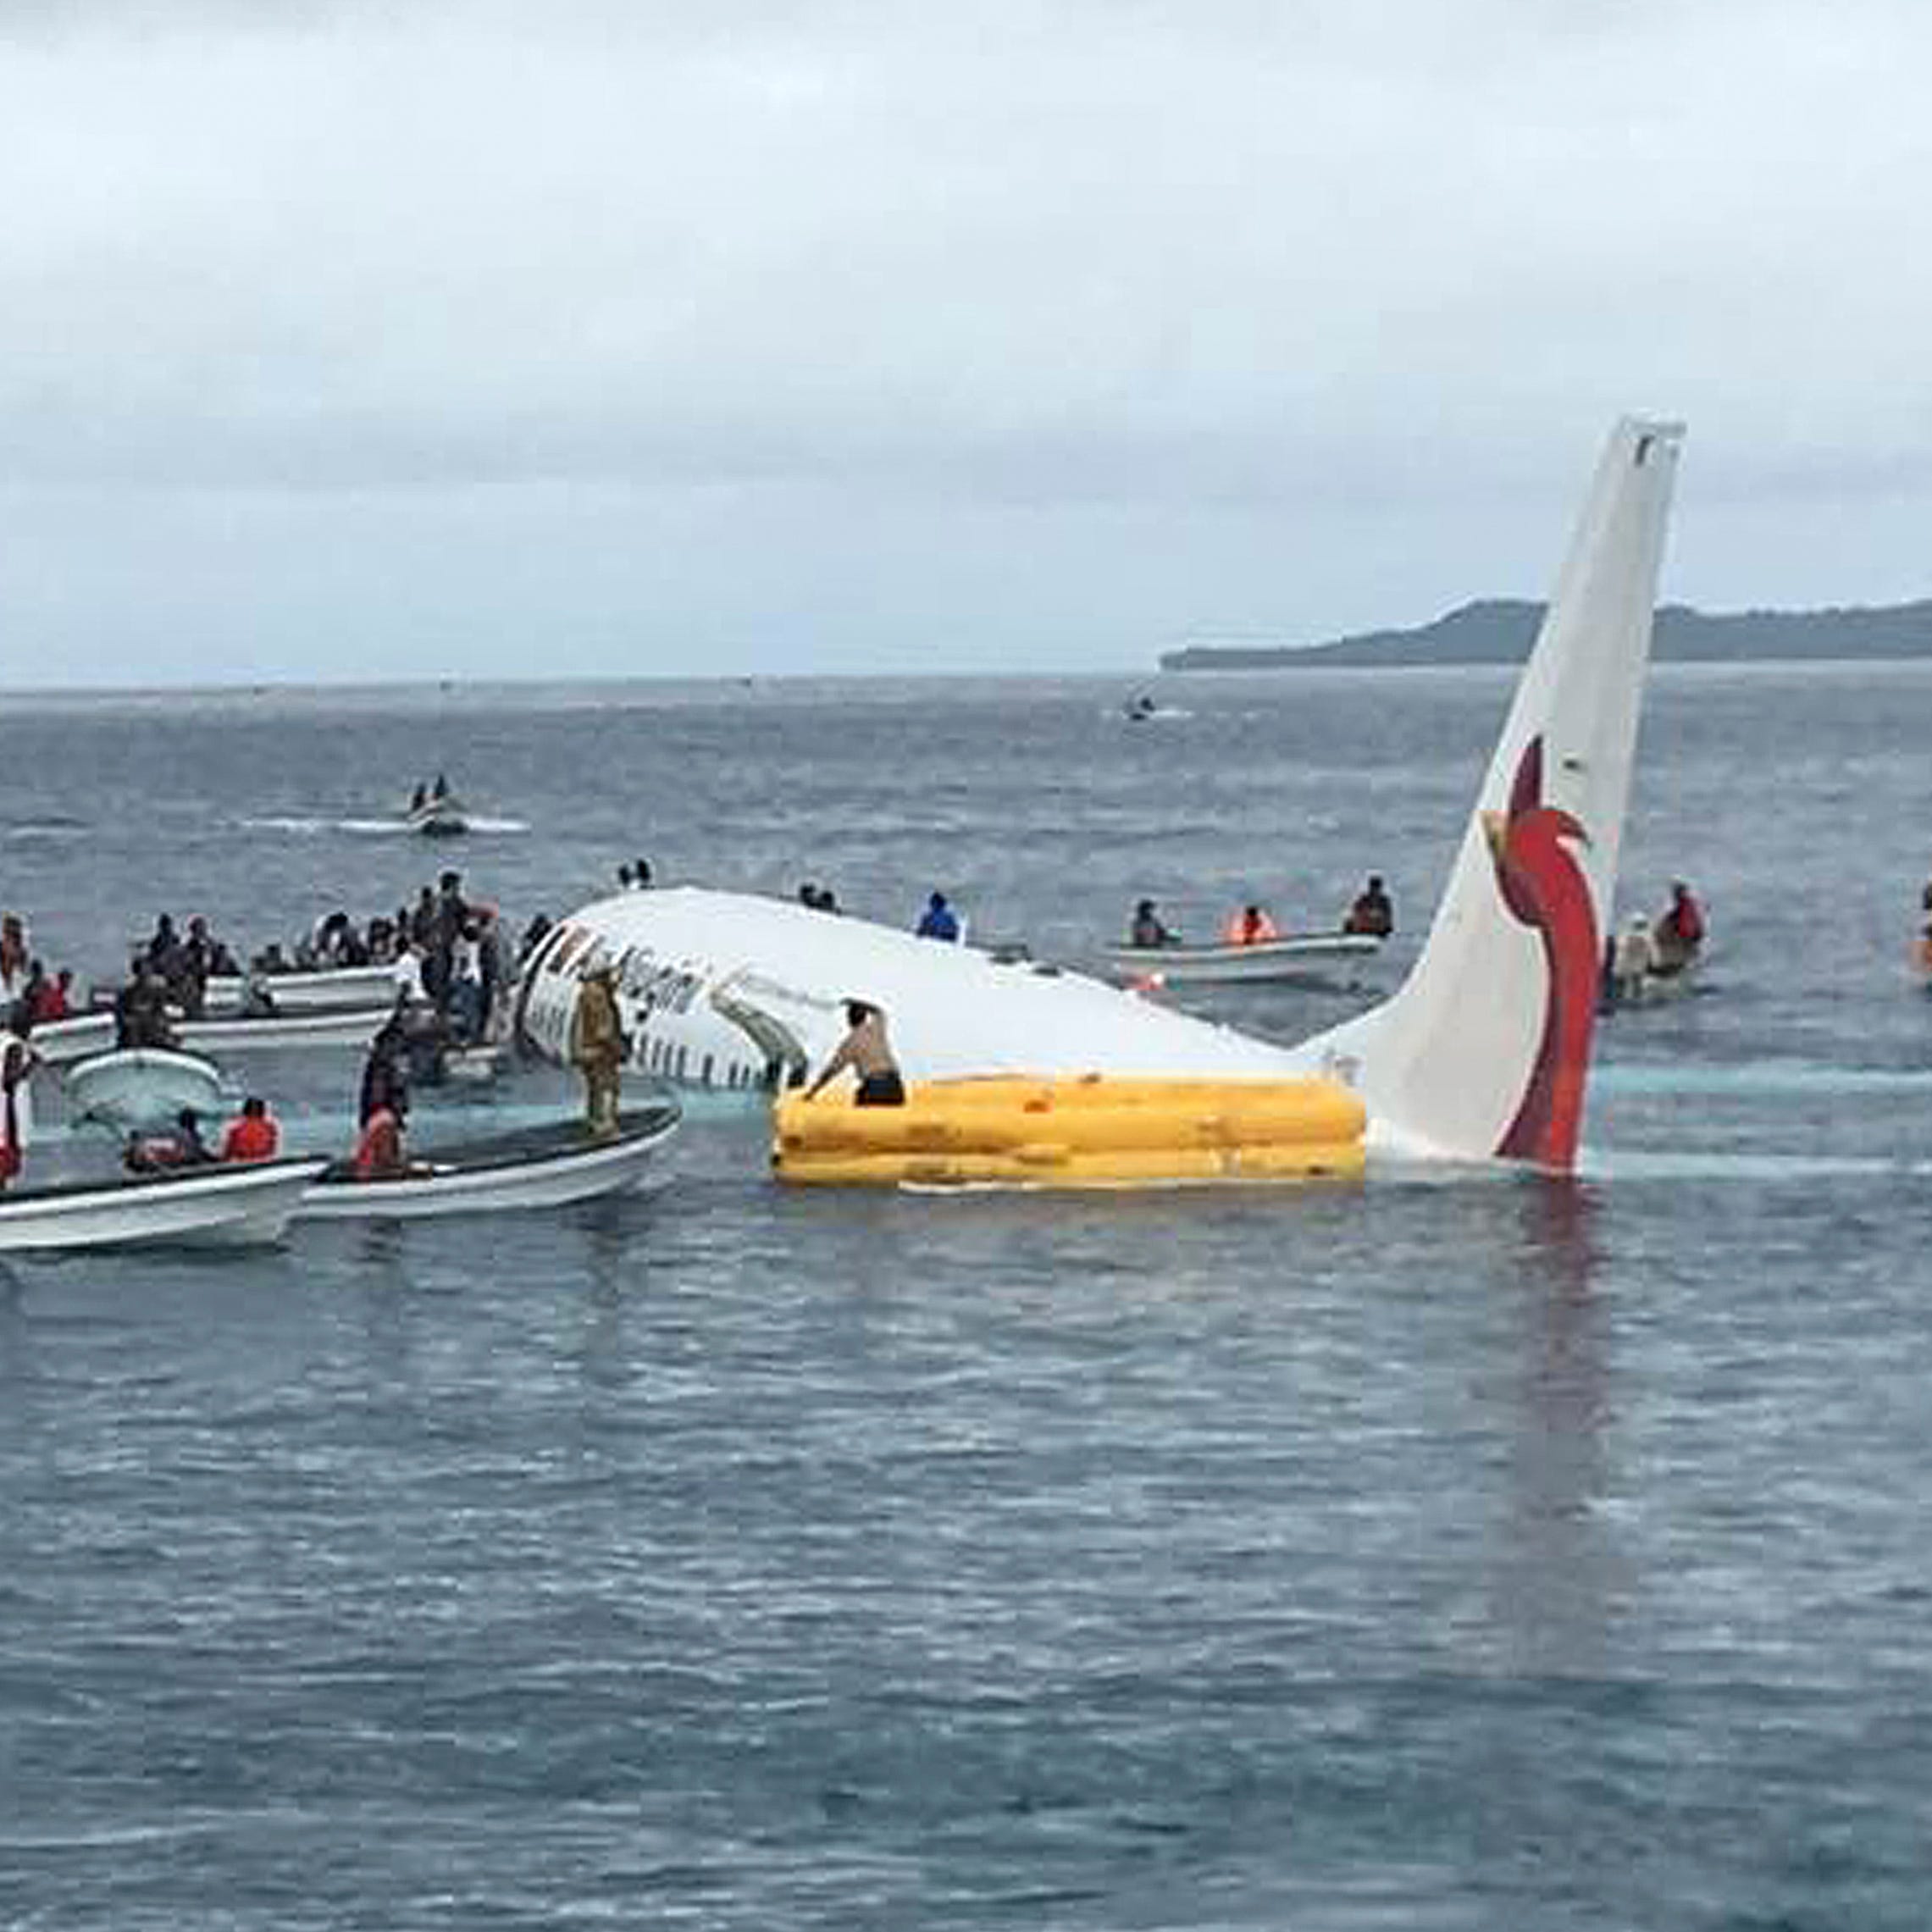 Local fishing boats move in to recover the passengers and crew of Air Niugini flight following the plane crashing into the sea on its approach to Chuuk International Airport in the Federated States of Micronesia.